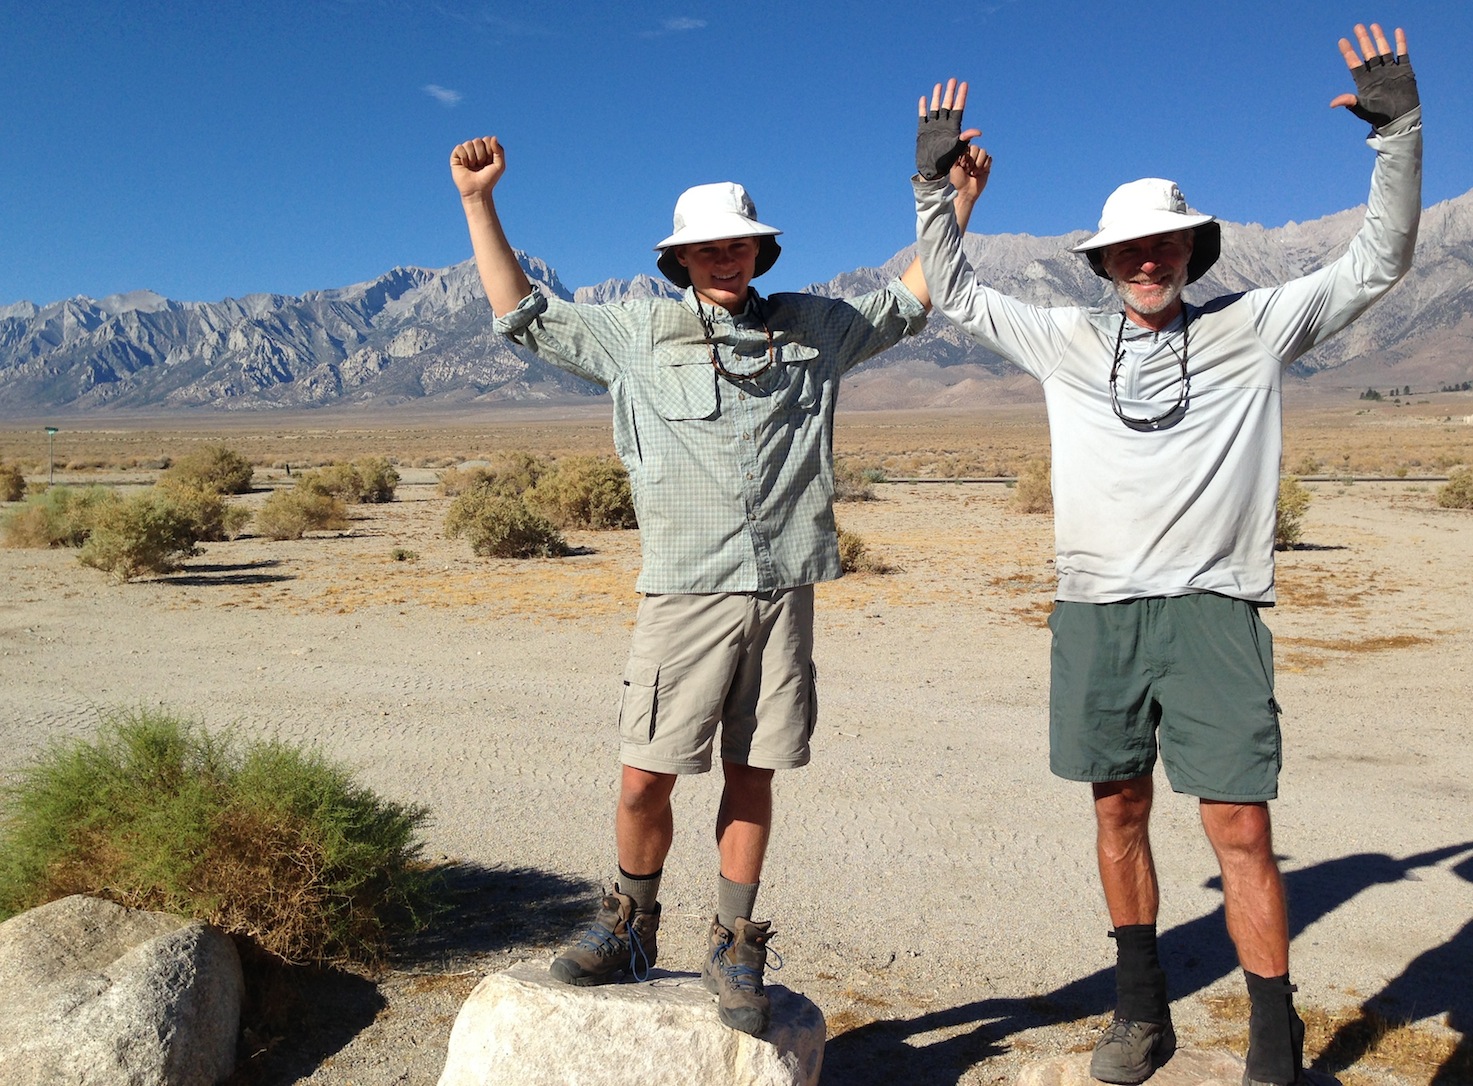 Dad Hunter and son Isaac at the Base Camp before hitting the trail to finish the JMT and summit Mt. Whitney